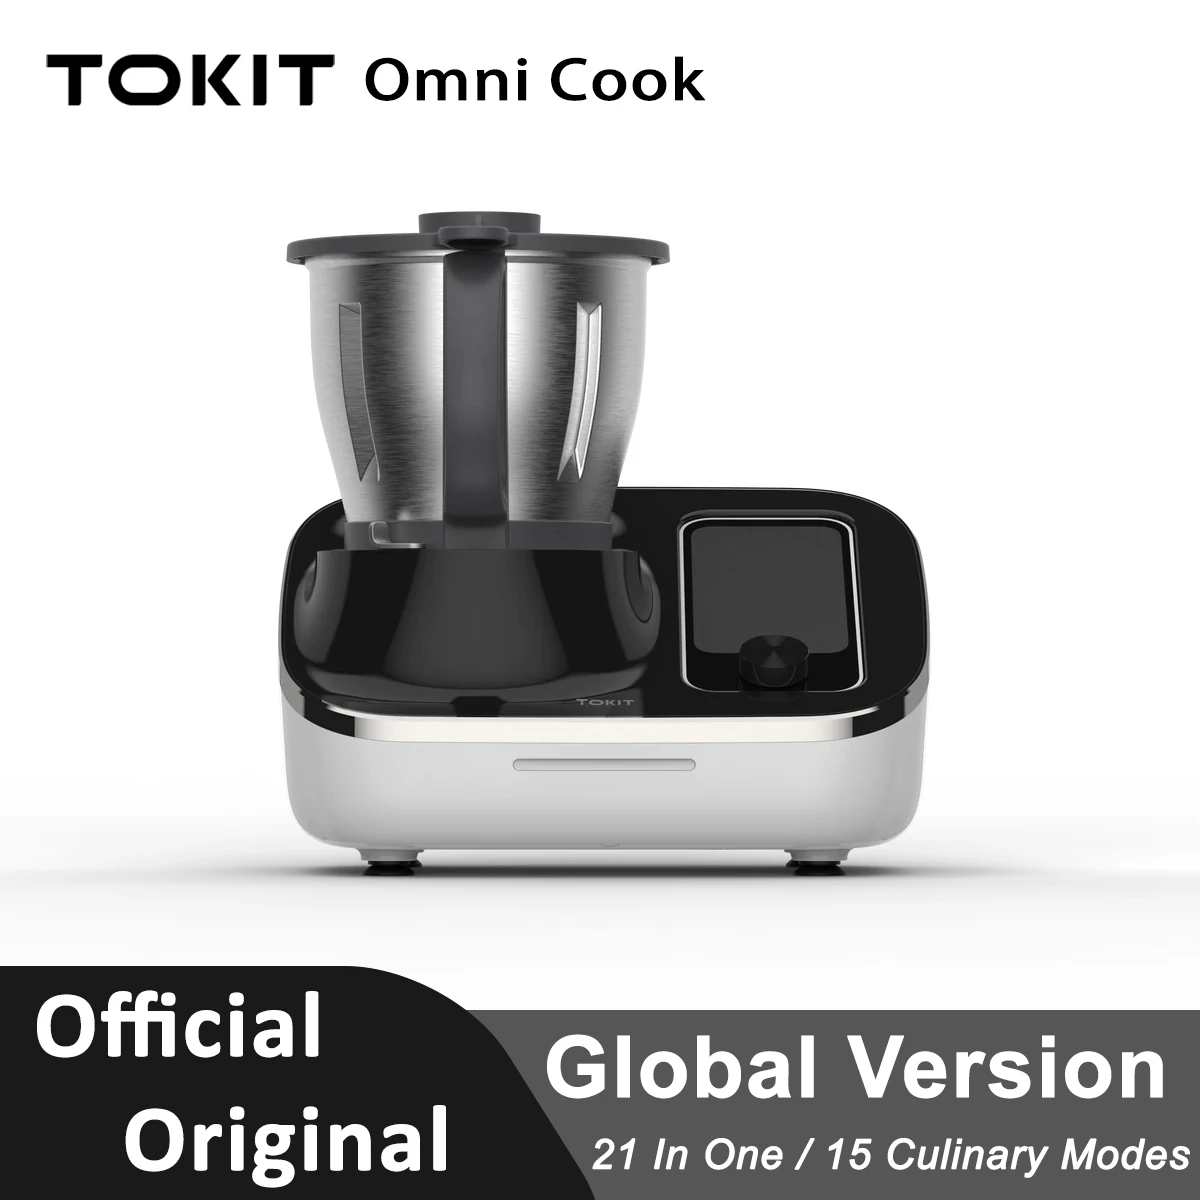 TOKIT Omni Cook Automatic Cooking Robot Household Smart Food Processors Cooking Machine Multifunctional Dishes Maker，2.2L/1700W